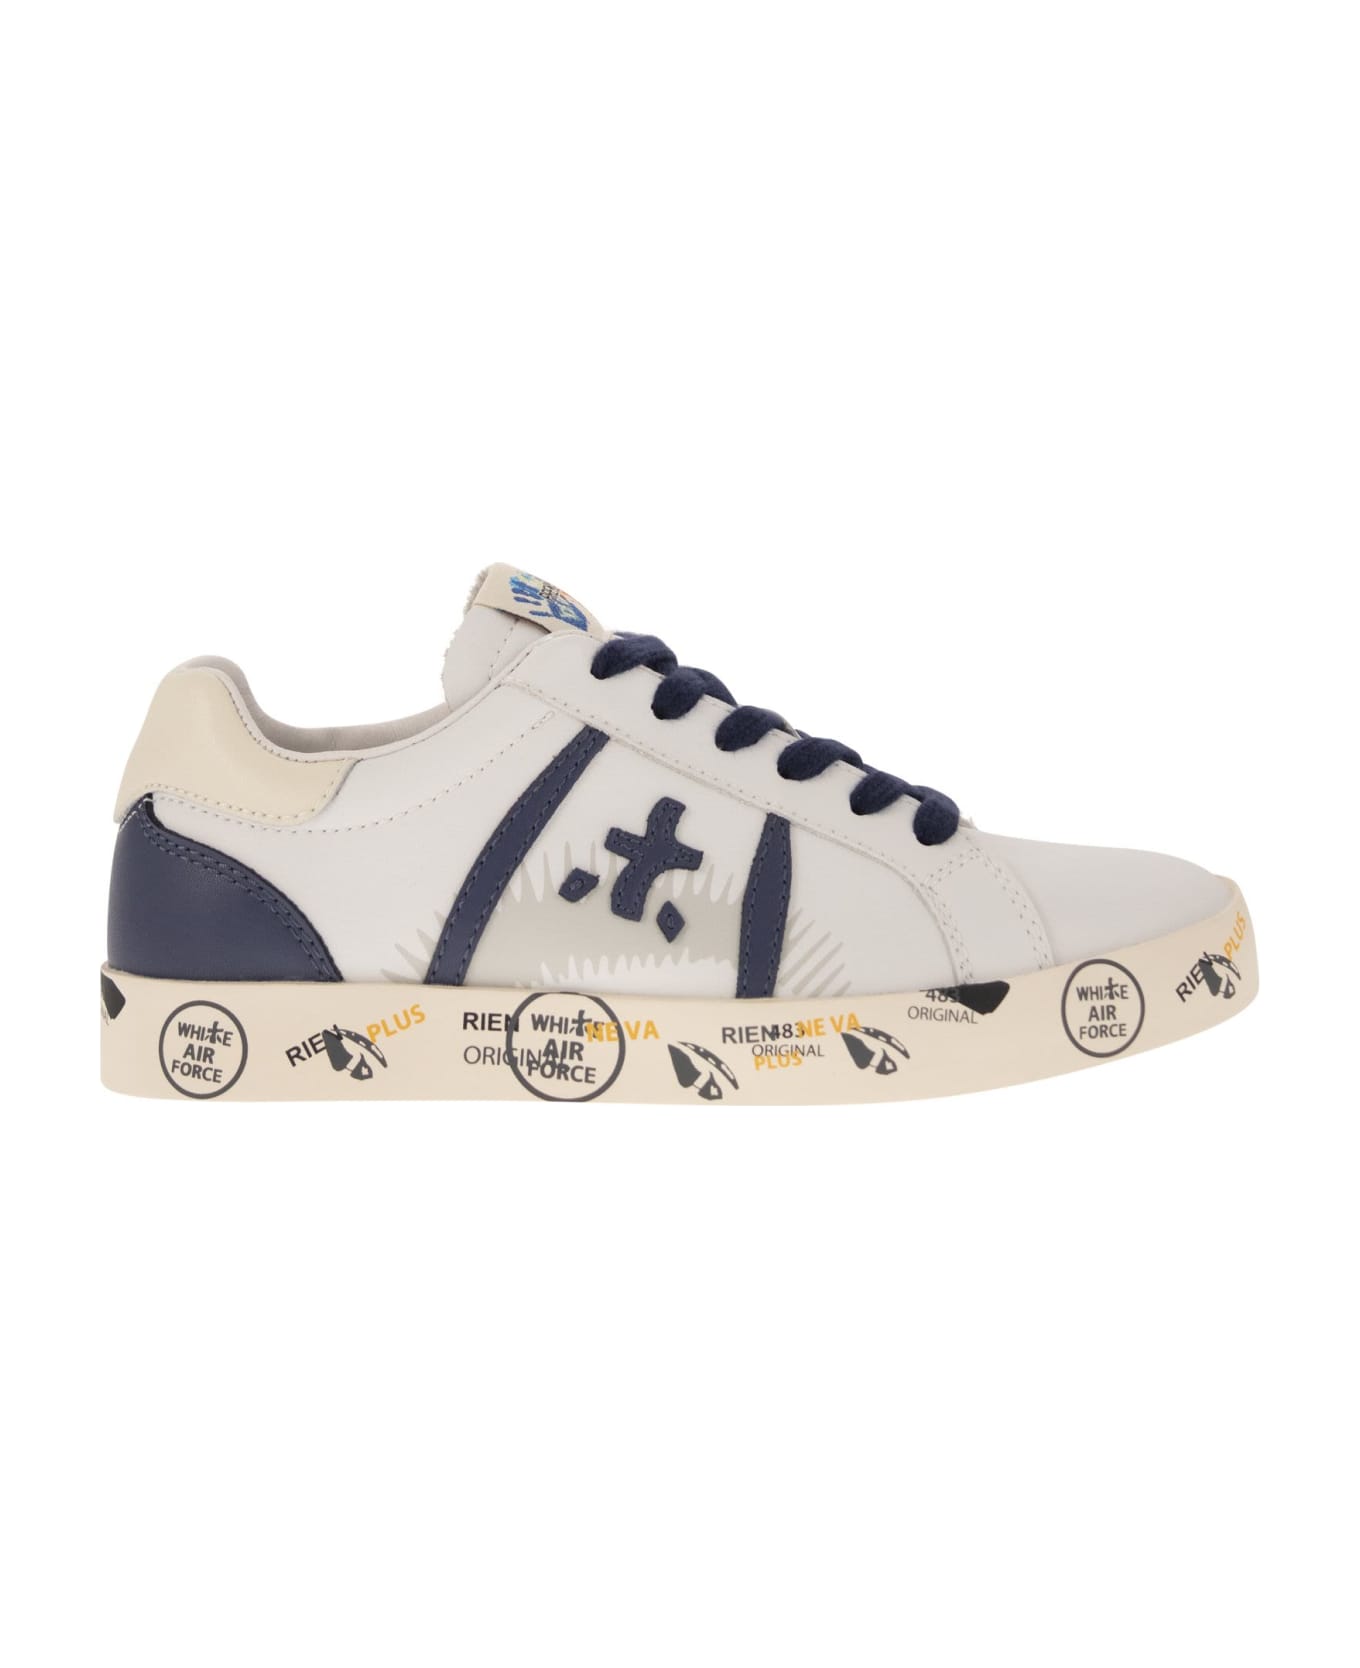 Premiata Andy - Leather Sneakers - White/blue